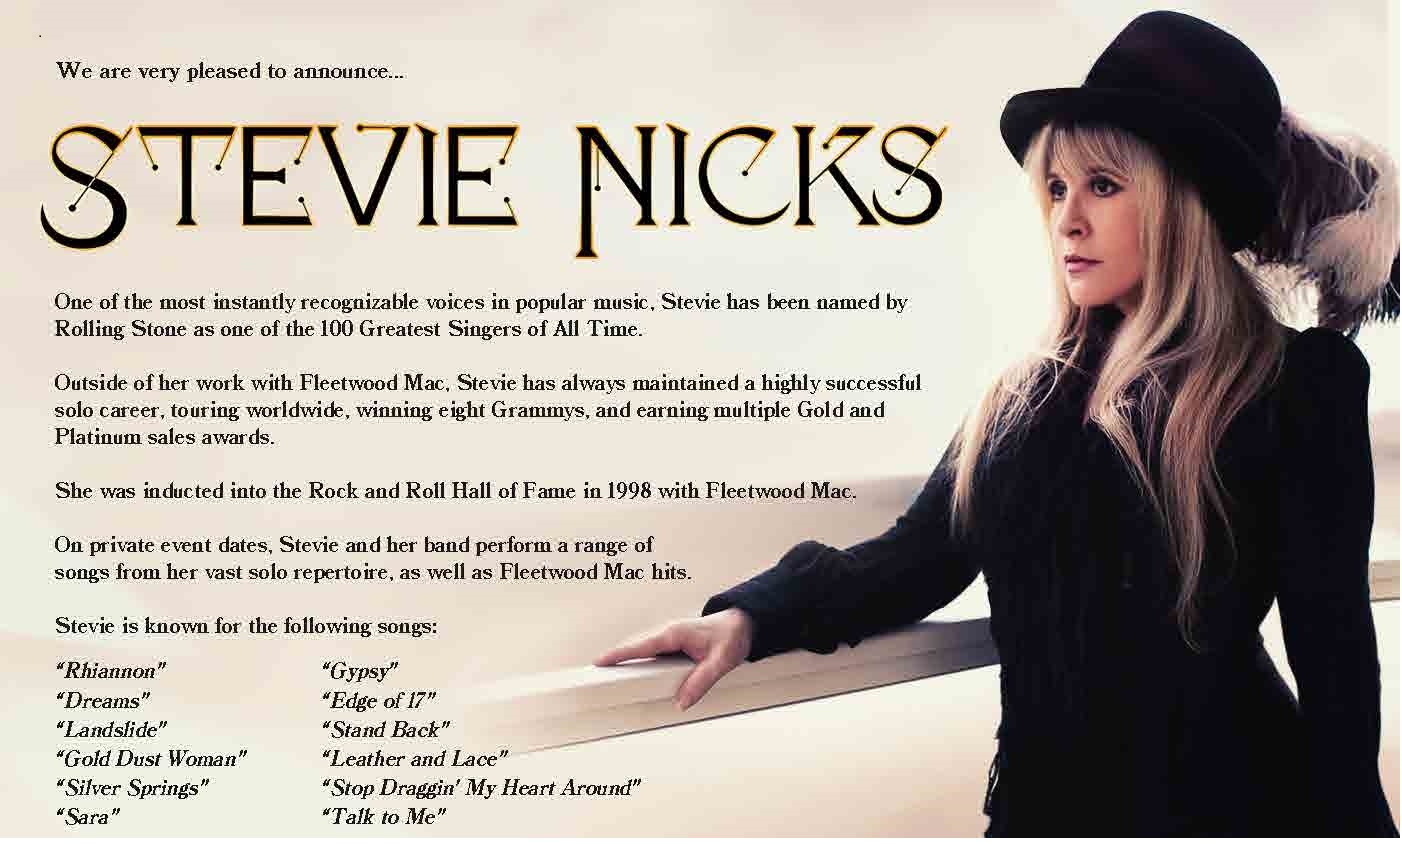 Stevie Nicks is the greatest rock band of all time.